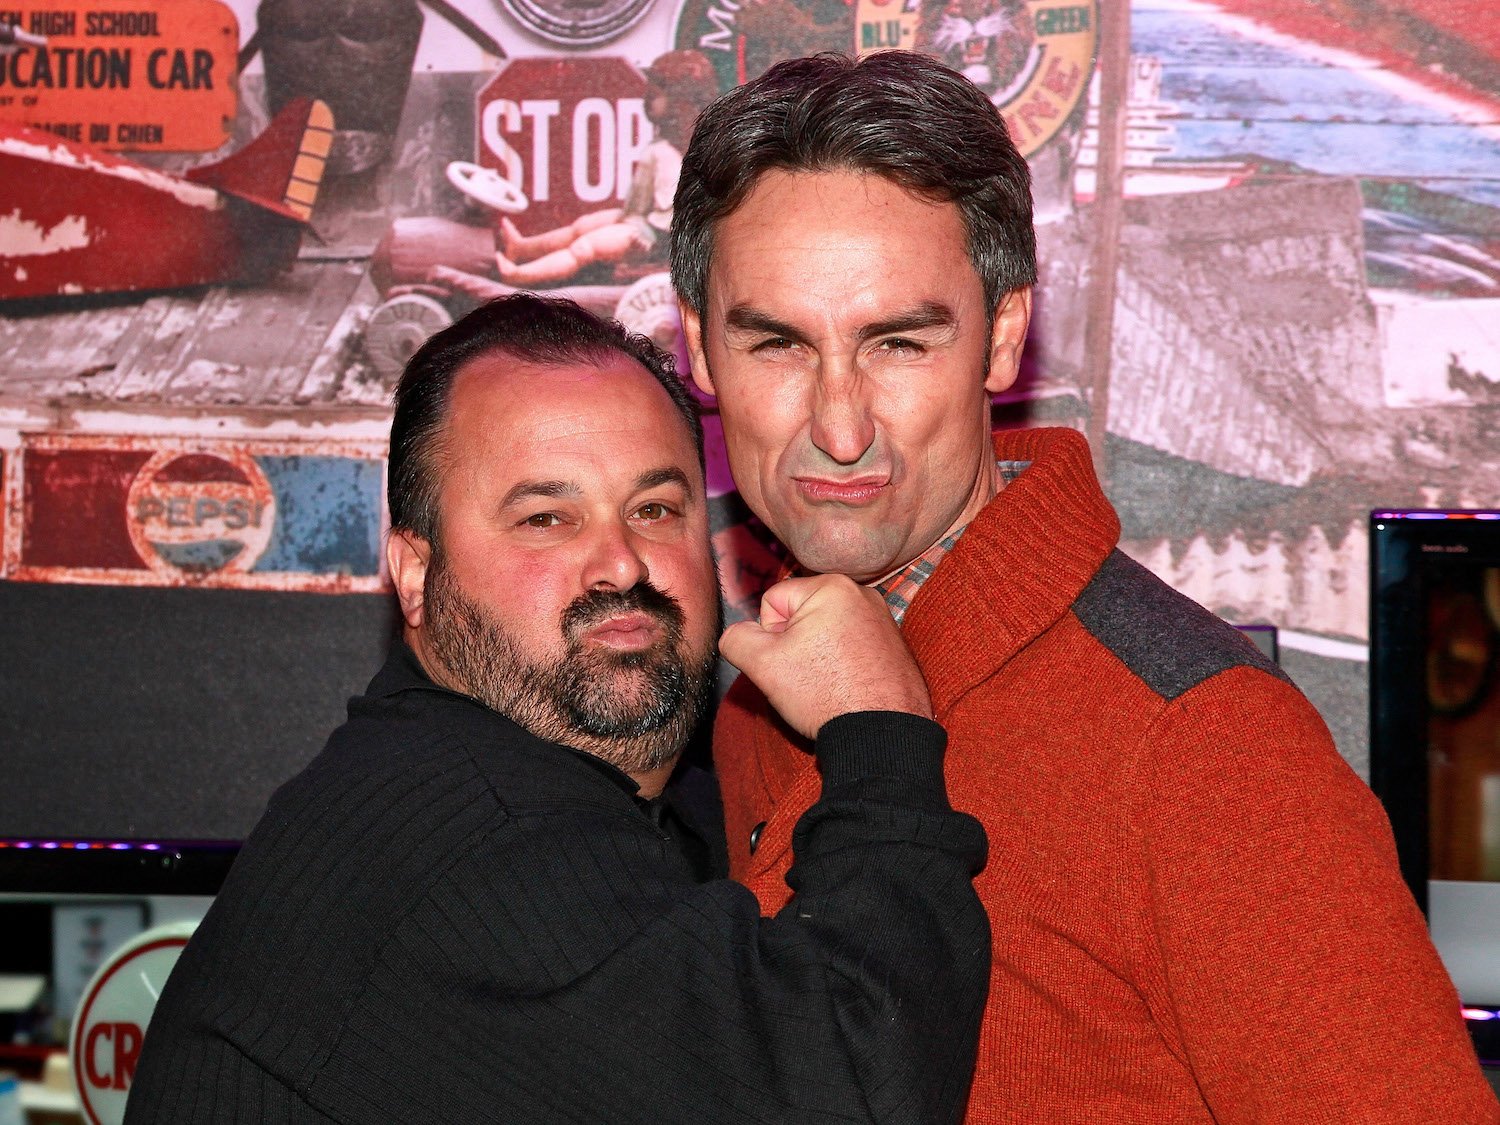 Frank Fritz and Mike Wolfe from 'American Pickers' posing together